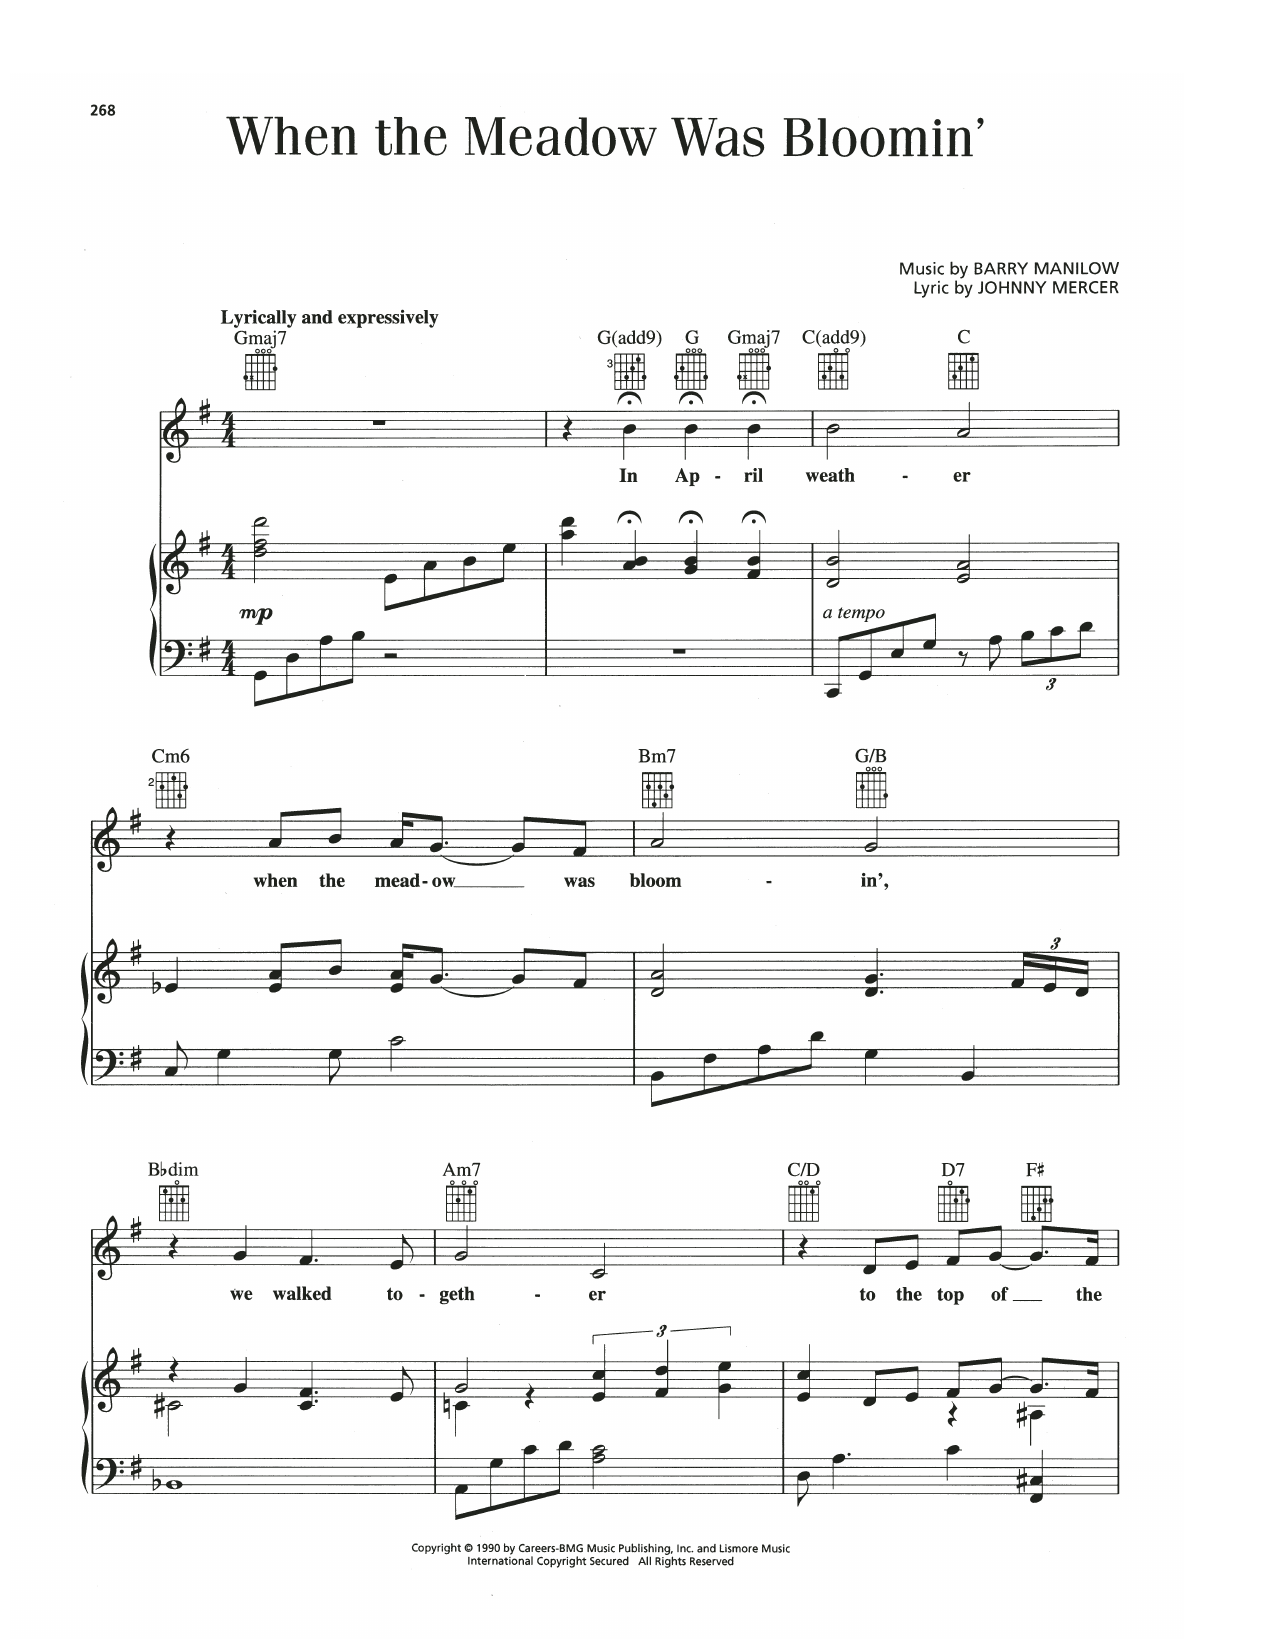 Download Barry Manilow When The Meadow Was Bloomin' Sheet Music